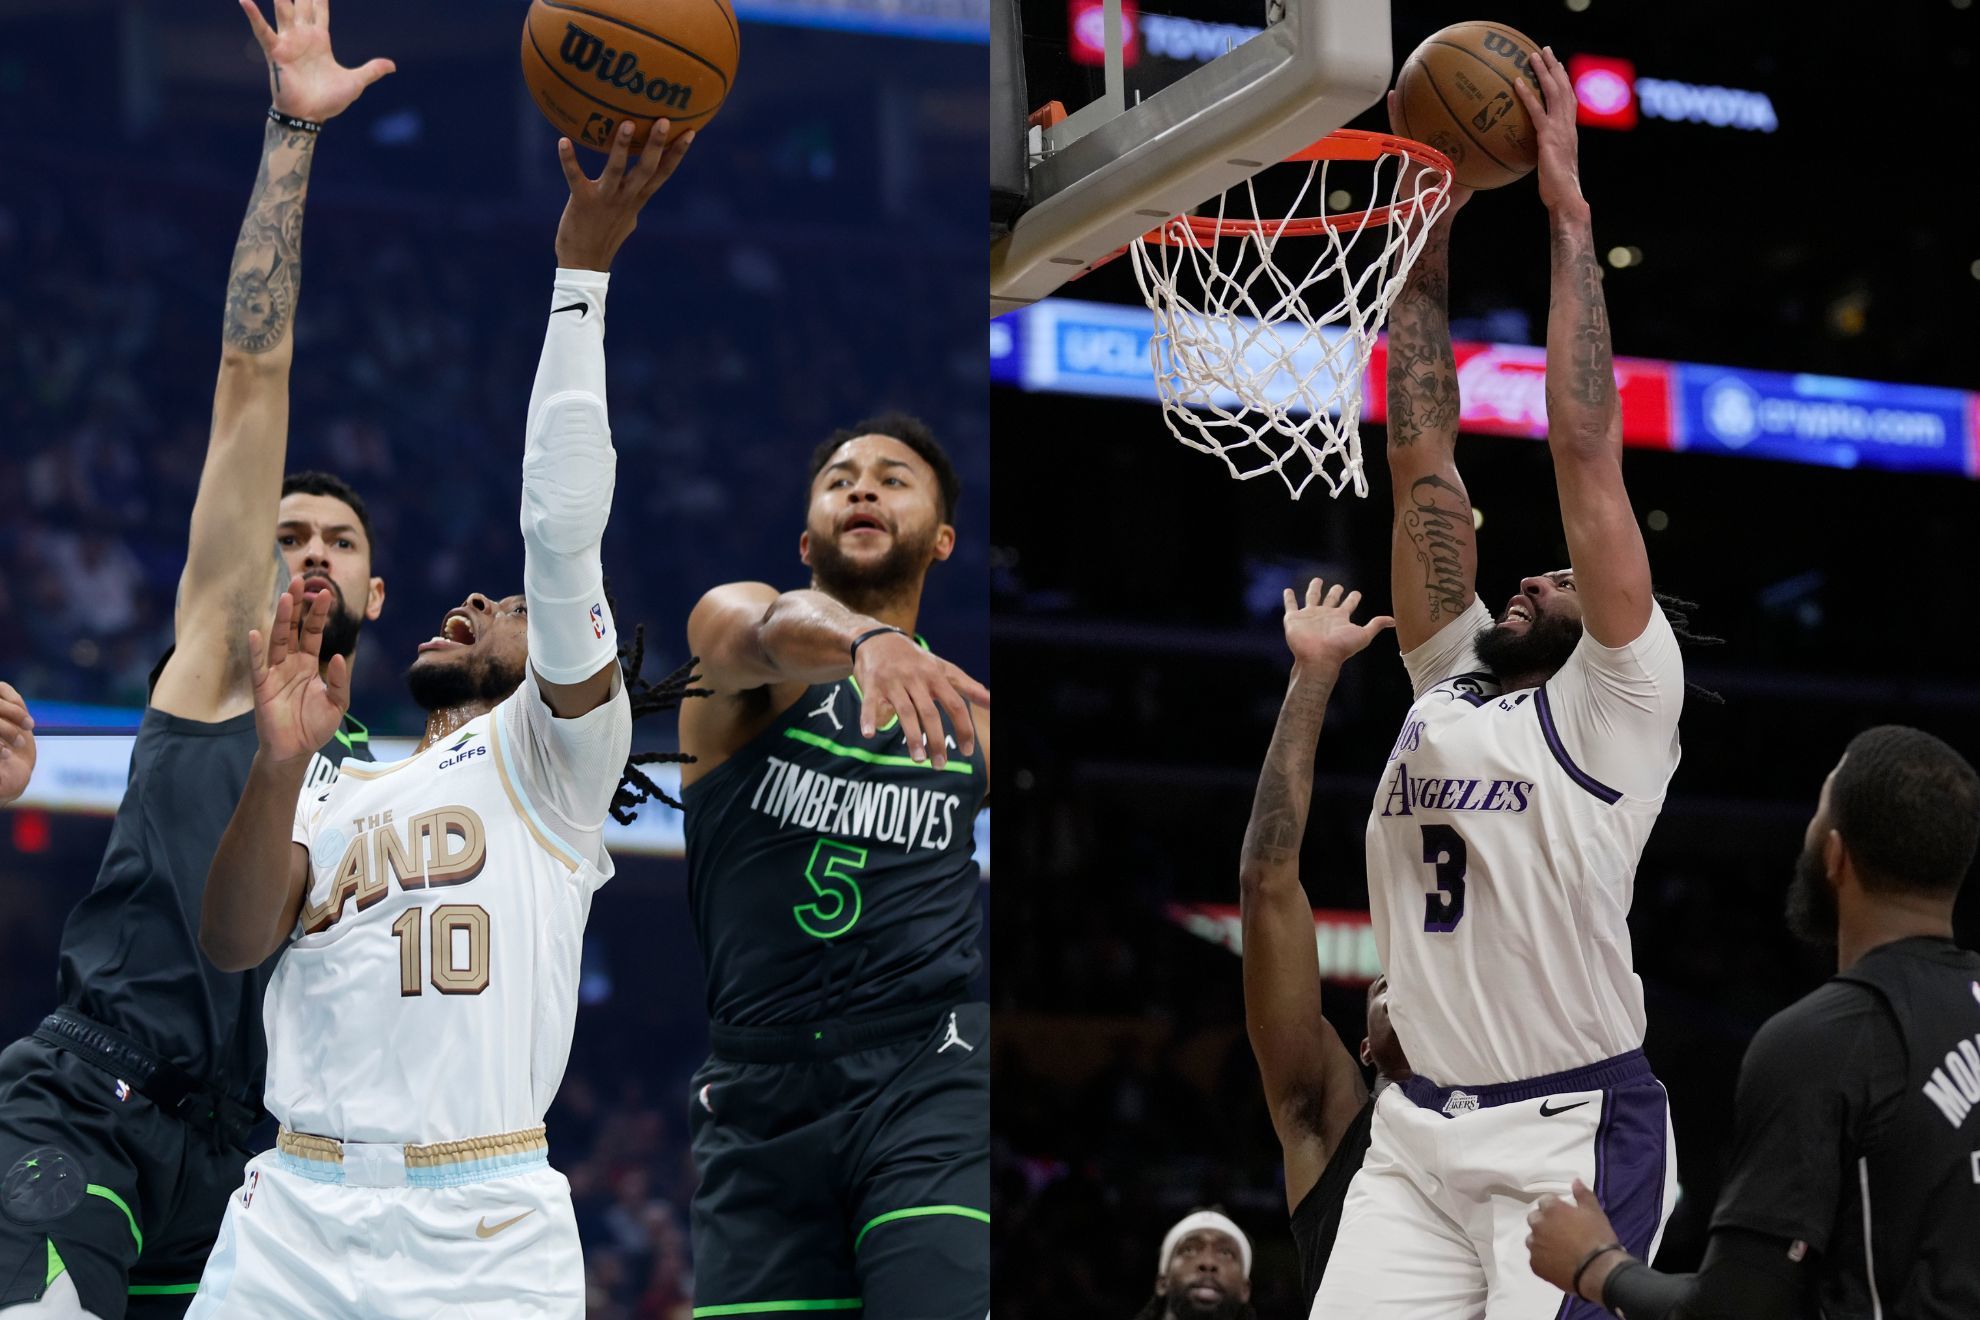 Minnesota Timberwolves at Cleveland Cavaliers (left) and Brooklyn Nets at Los Angeles Lakers (right)